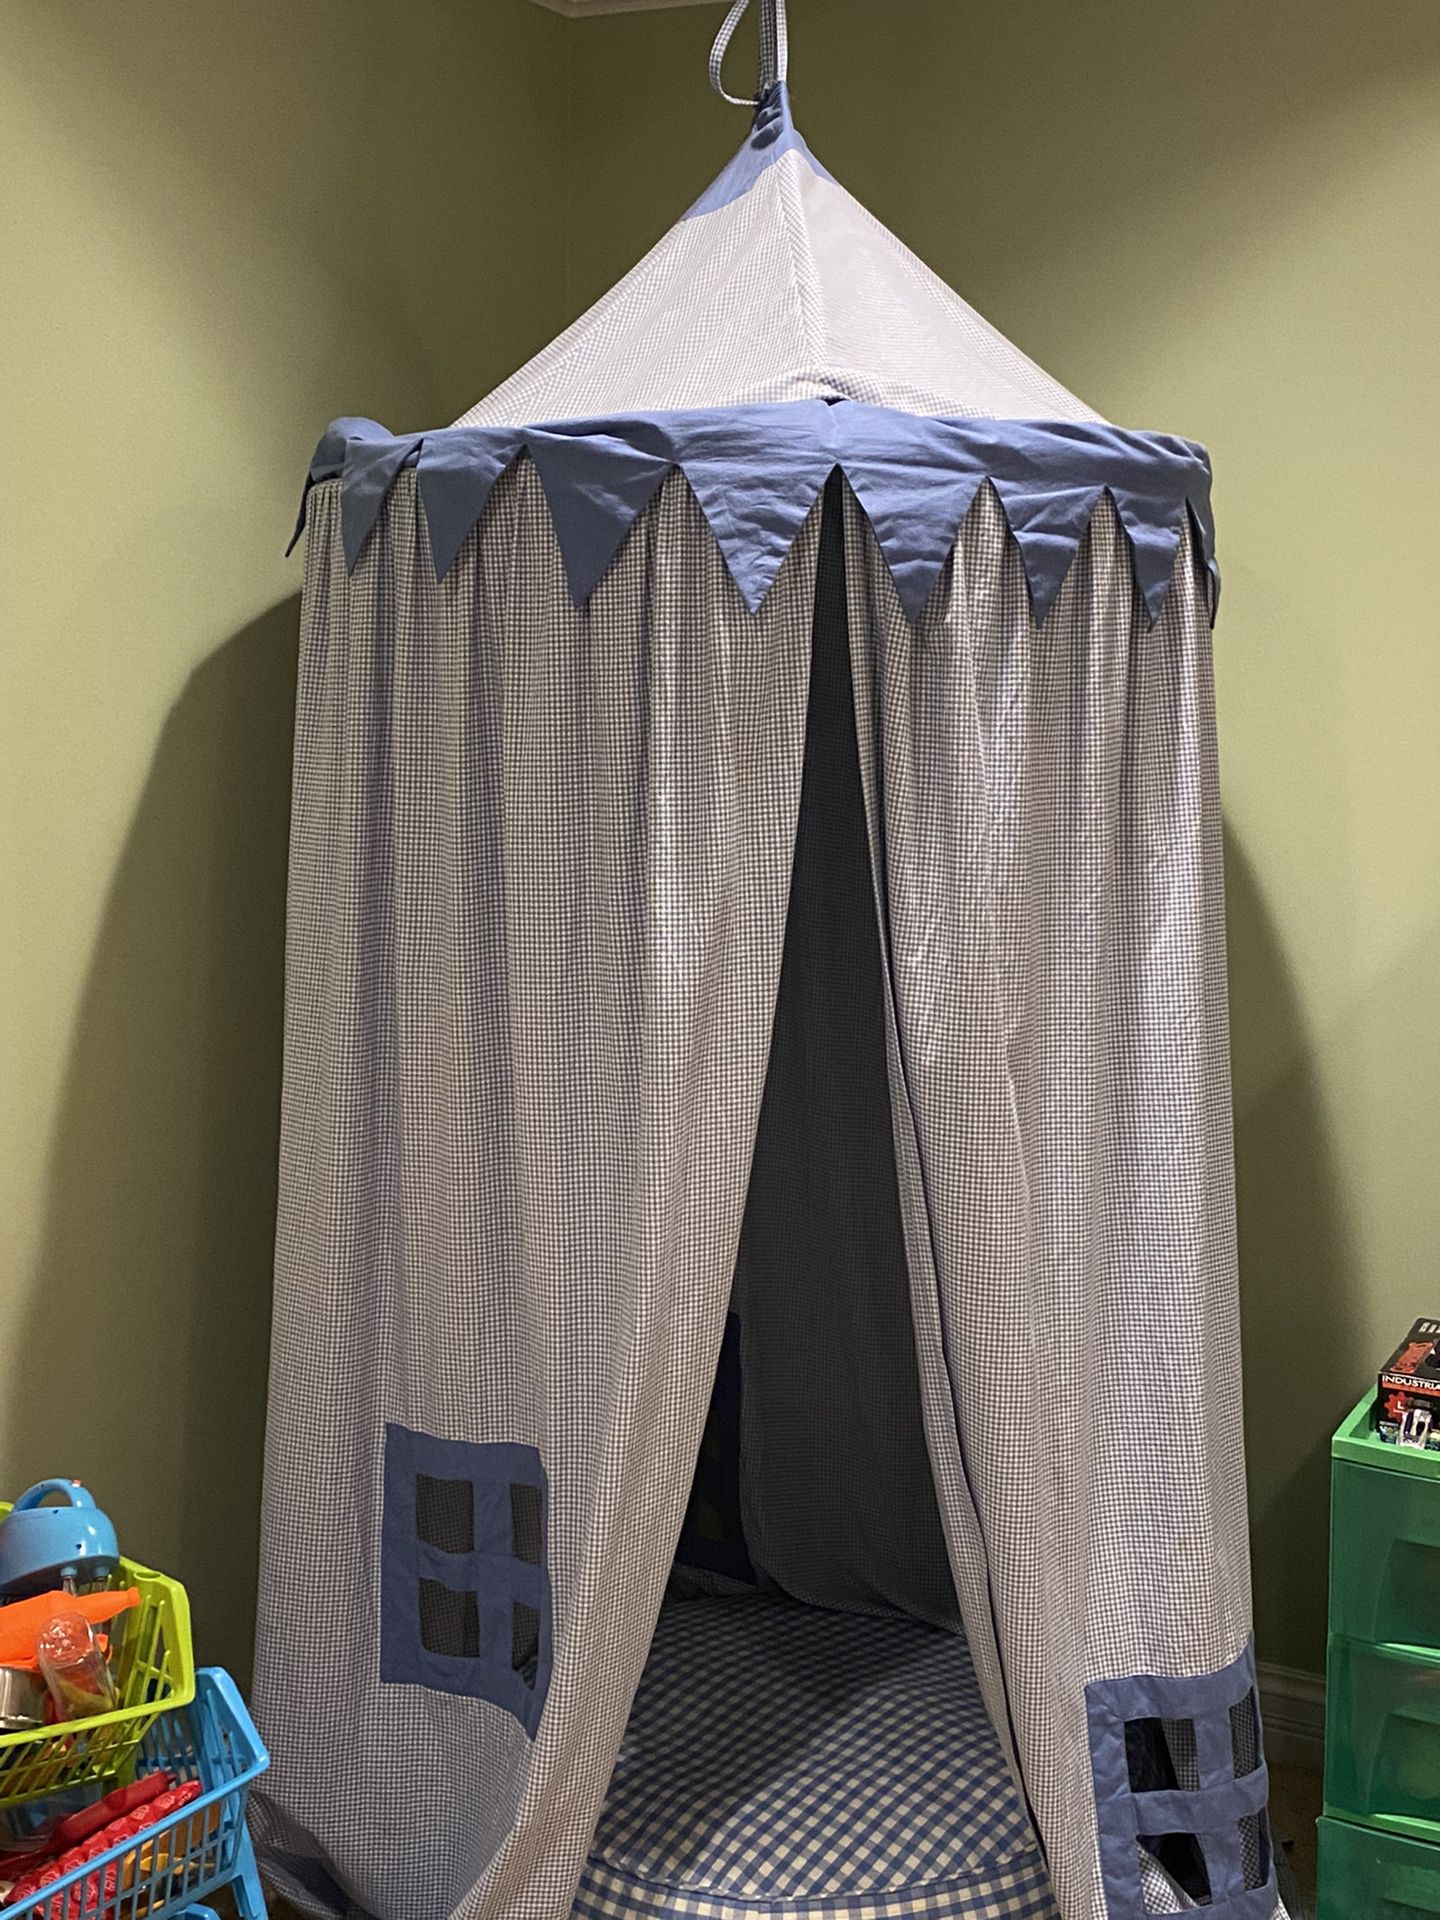 Play Tent 